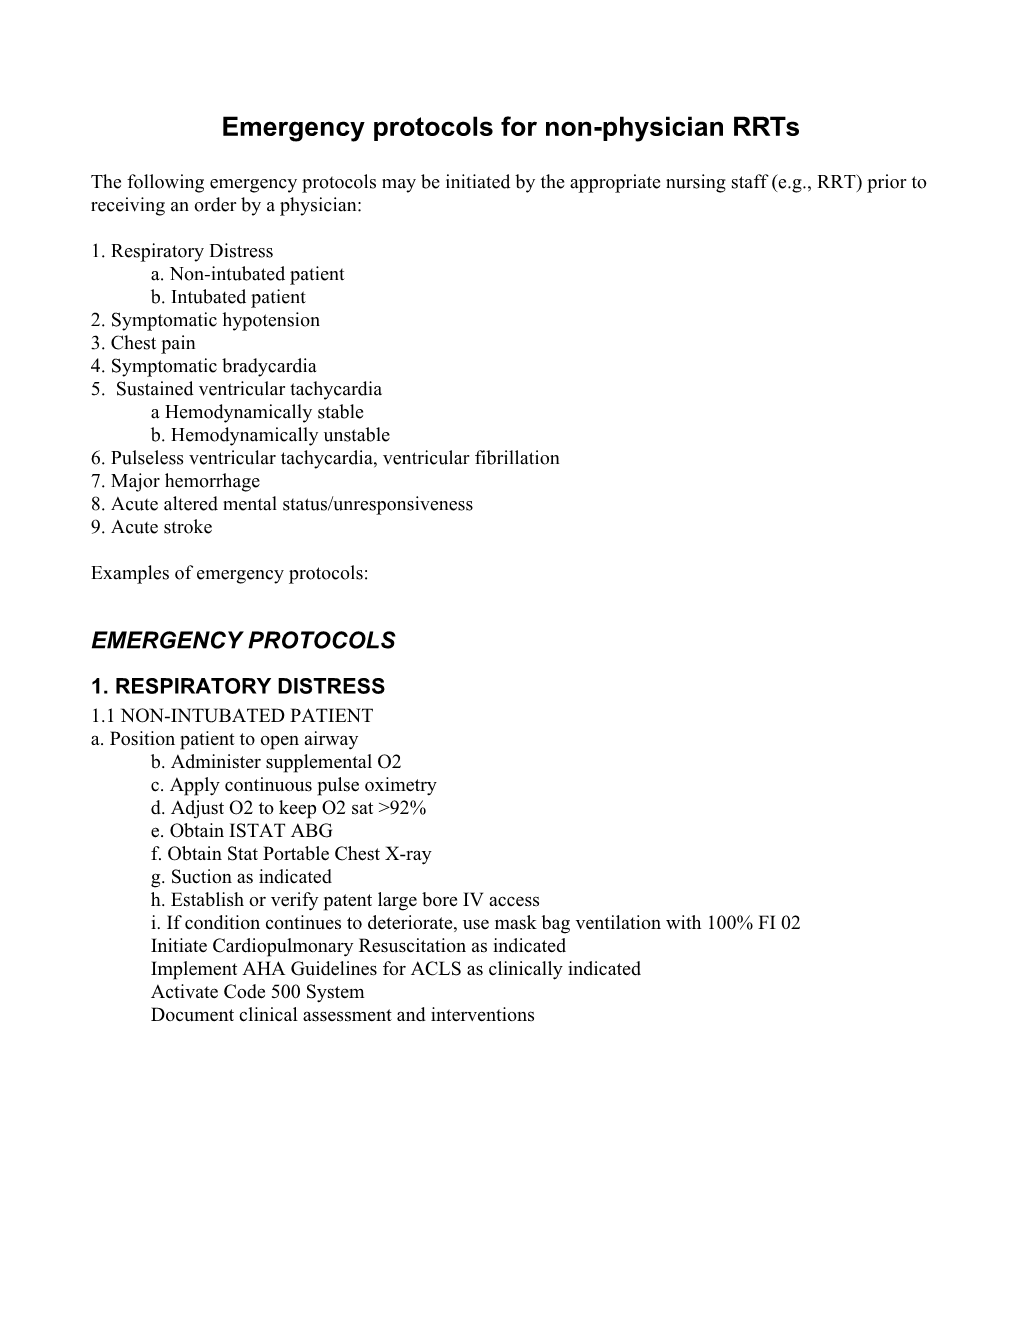 Emergency Protocols for Non-Physician Rrts